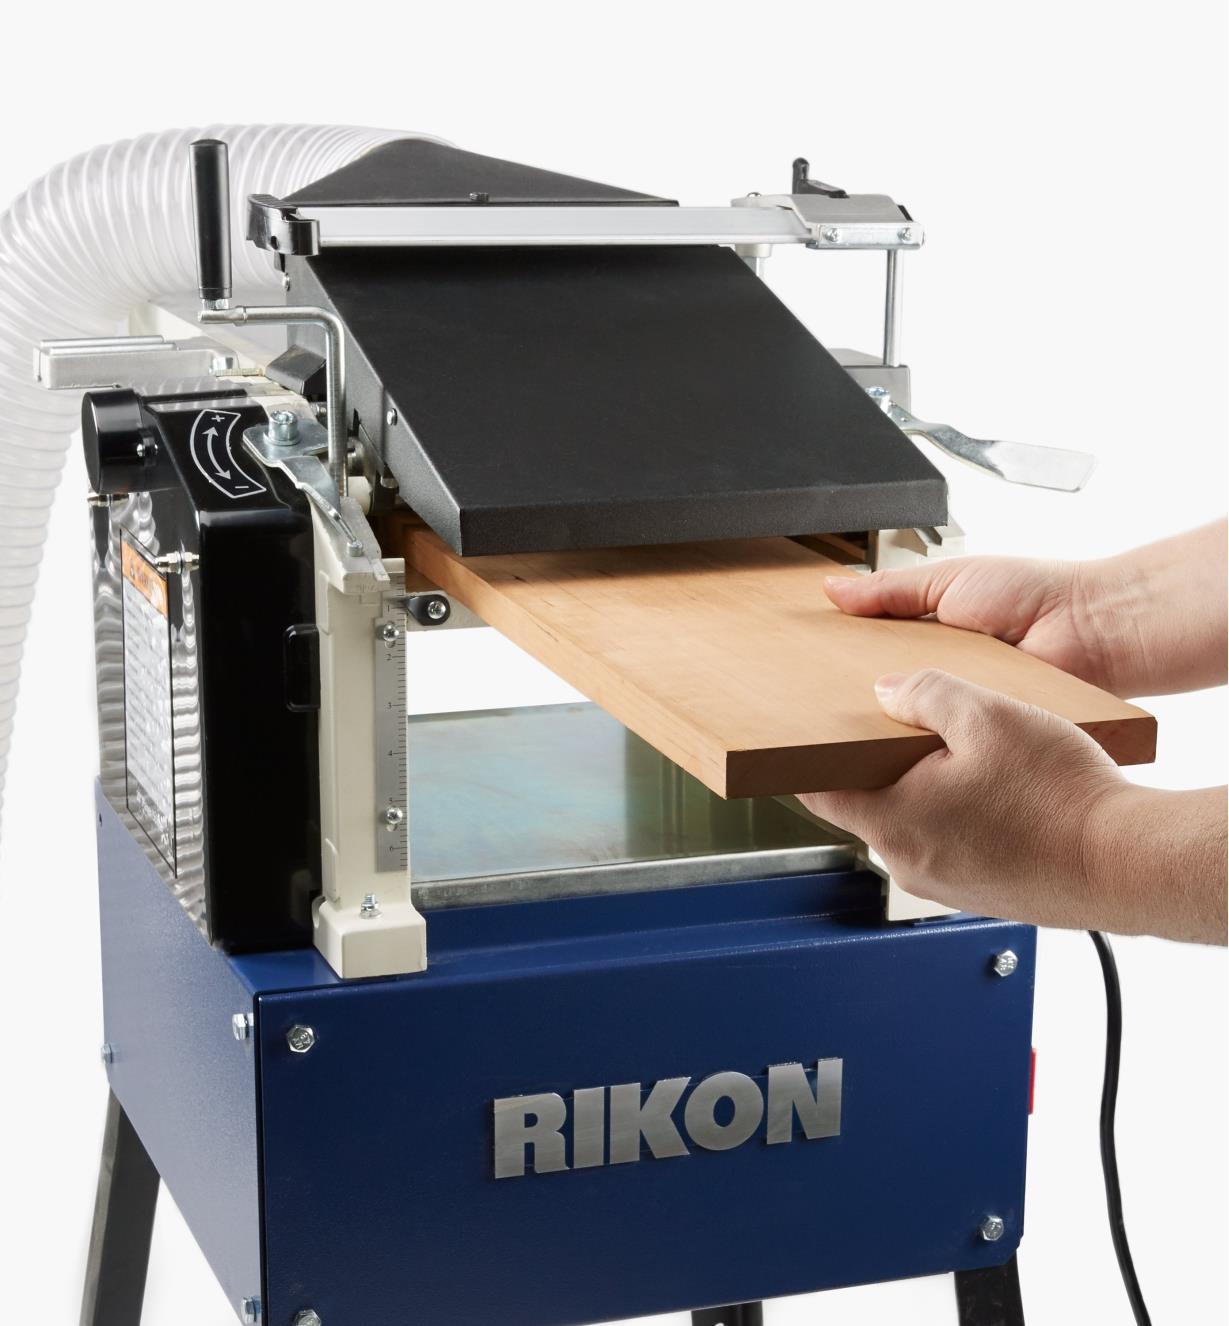 A woodworker feeds stock into the Rikon 10" helical planer/jointer